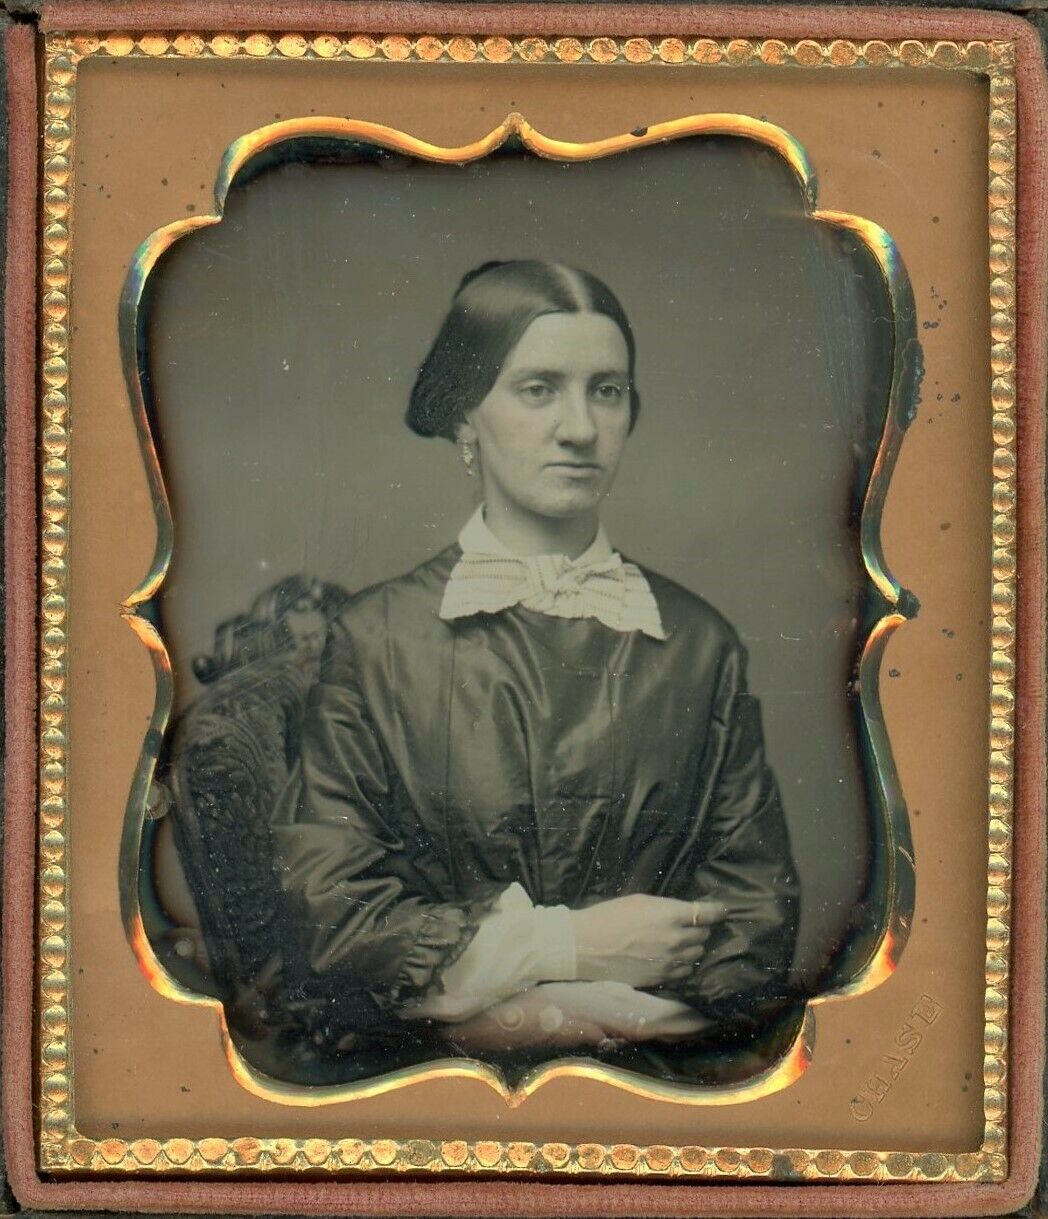 Pretty Woman Arms Crossed Maker Identified As Chase (1/6 Plate Daguerreotype)